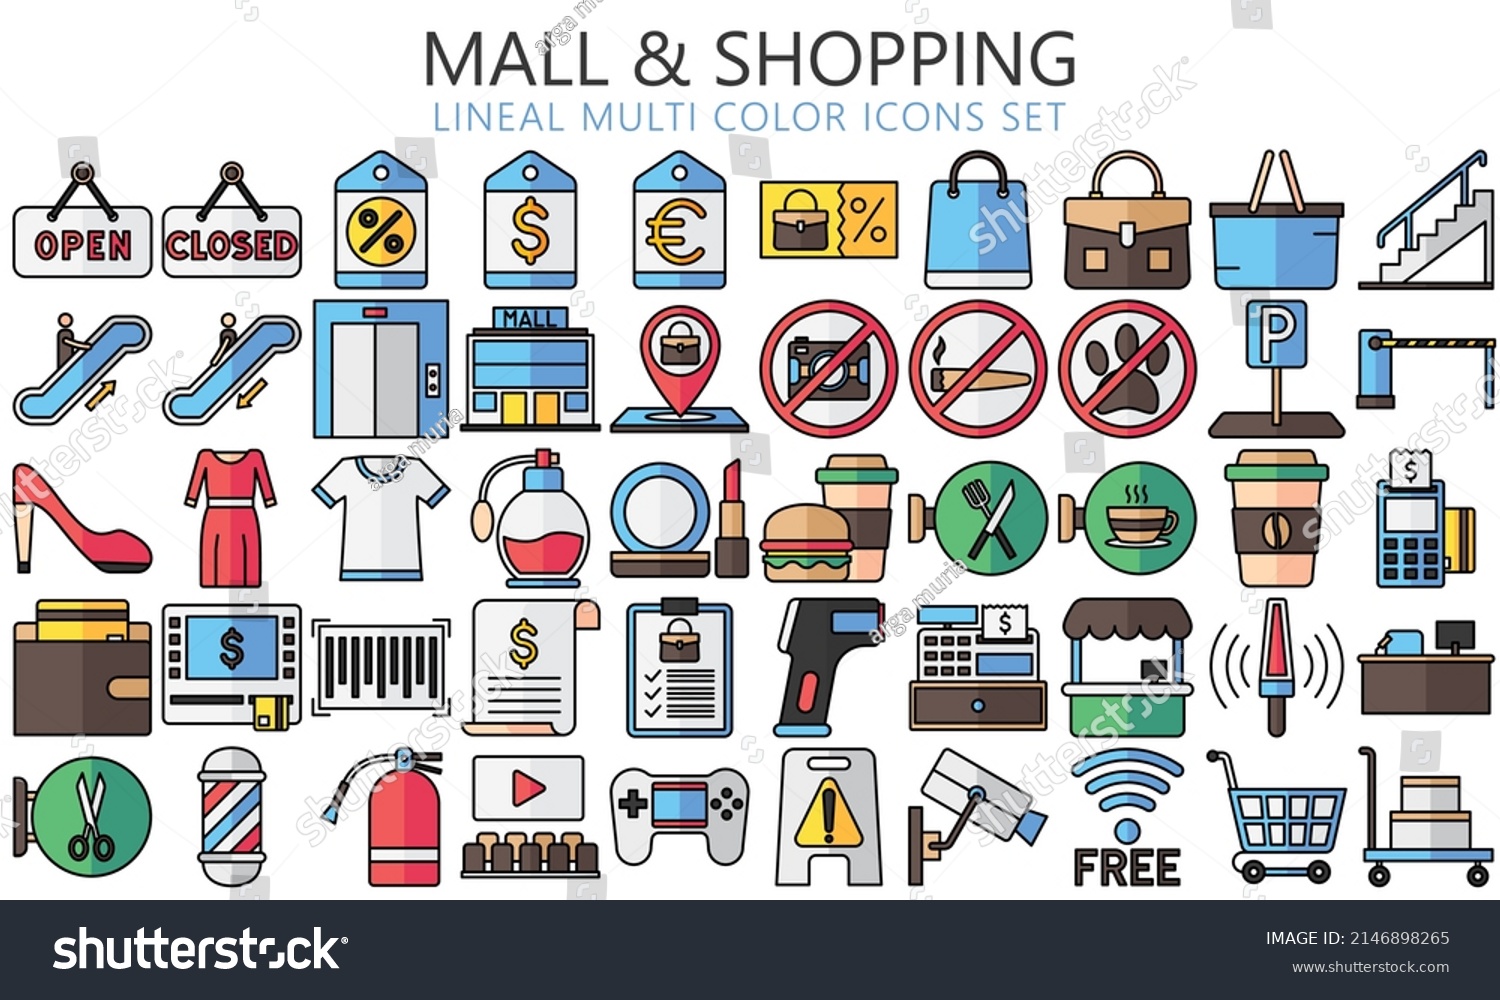 SVG of Market Shopping mall, retail, lineal multi color icons set with sale, bag, basket, offer, store and payment symbols. Used for web, UI, UX kit and applications, vector EPS 10 ready convert to SVG svg